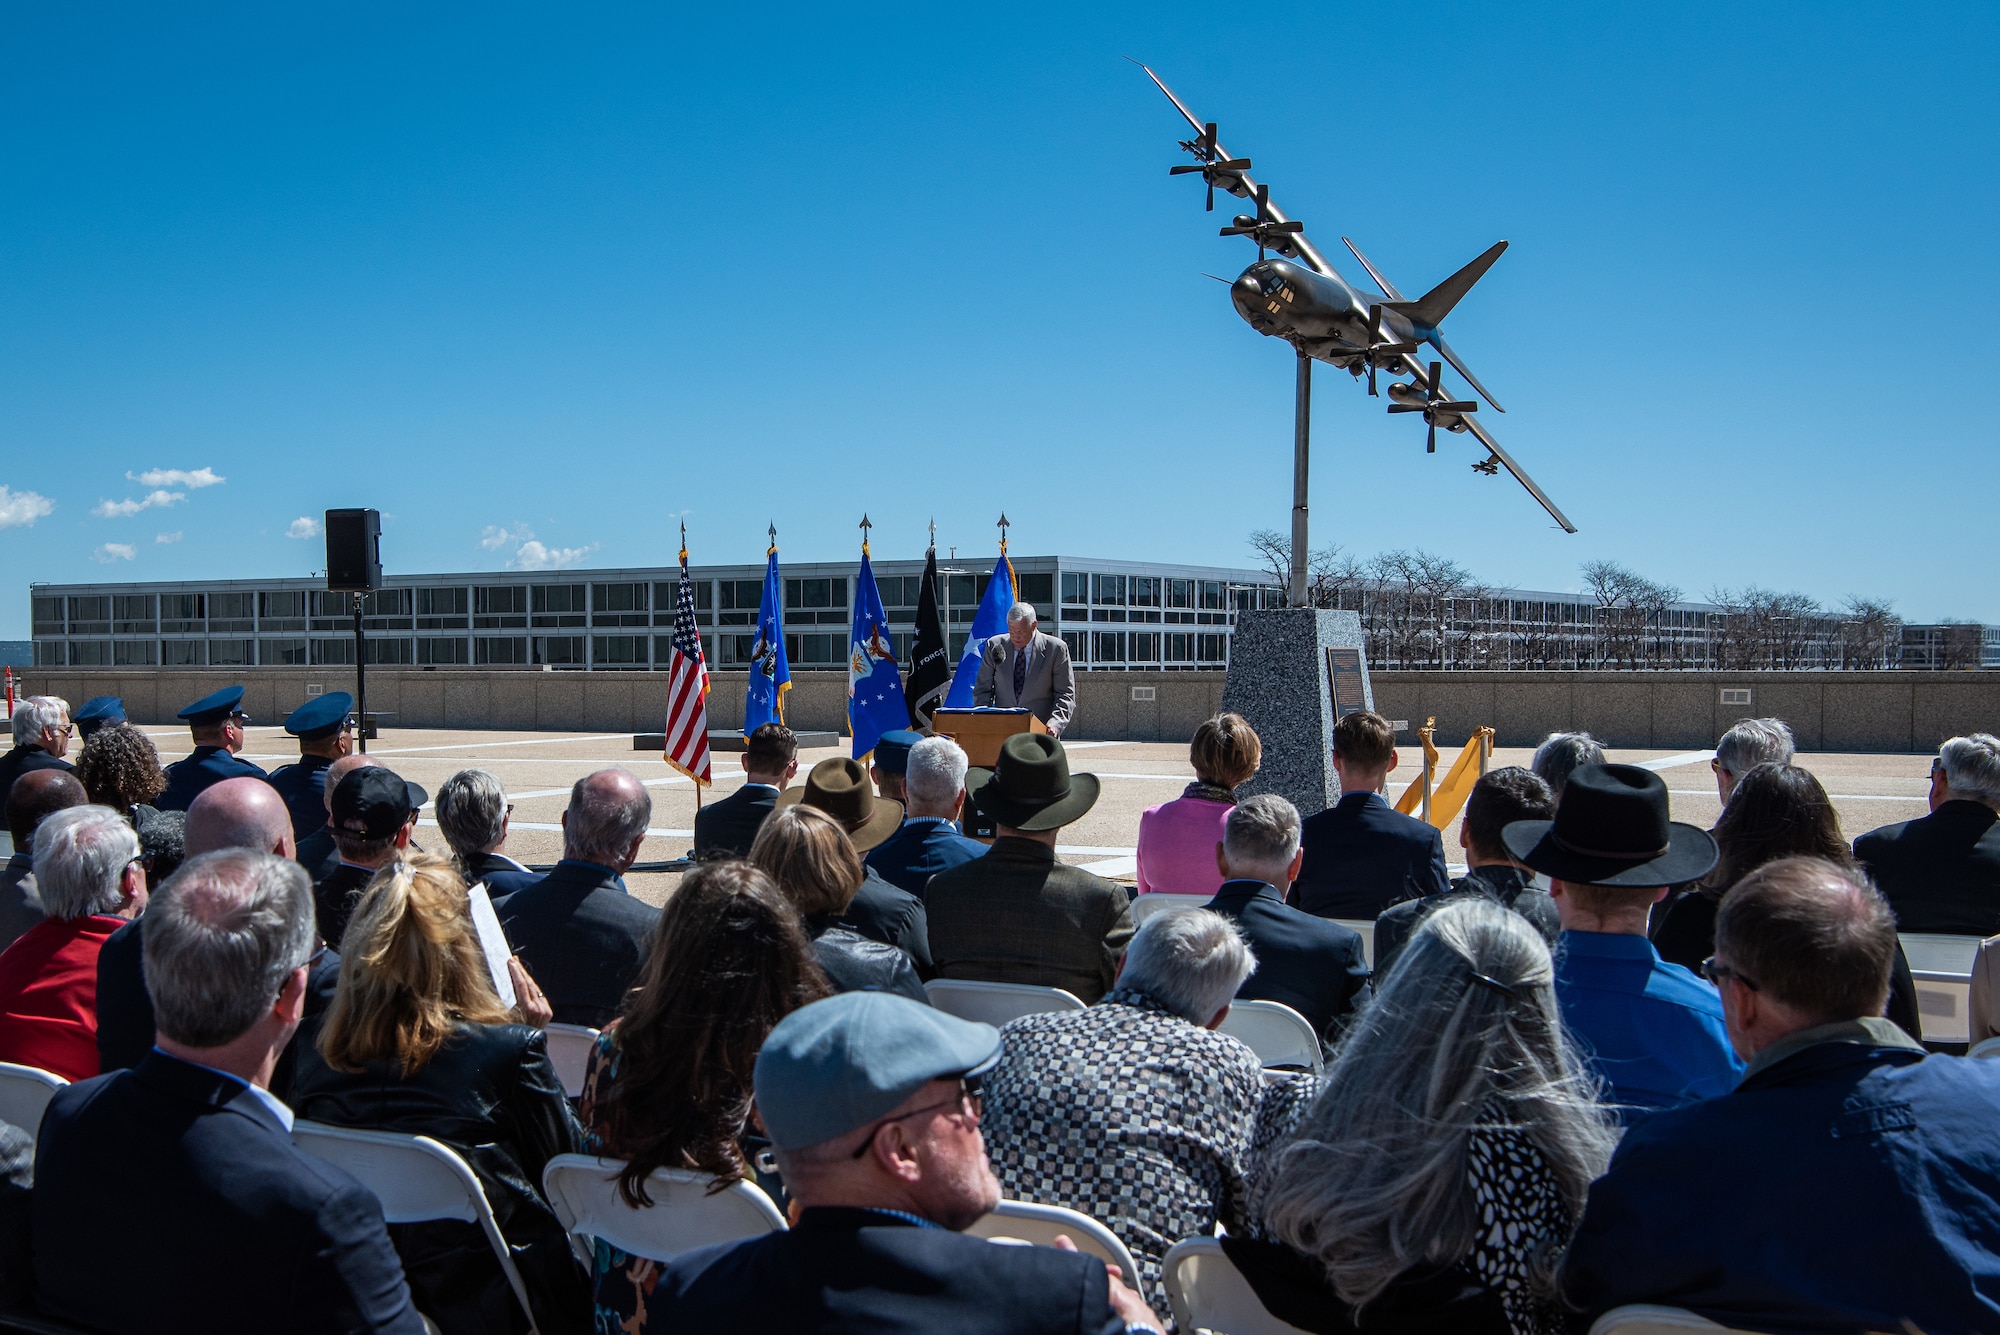 Michael Van Hoomissen, U.S. Air Force Academy Class of 1979 president, gives a speech in front of a crowd to commemorate a sculpture of an AC-130H Spectre gunship, call sign Spirit 03, during a ceremony at the Air Force Academy Colorado on May 5, 2023.